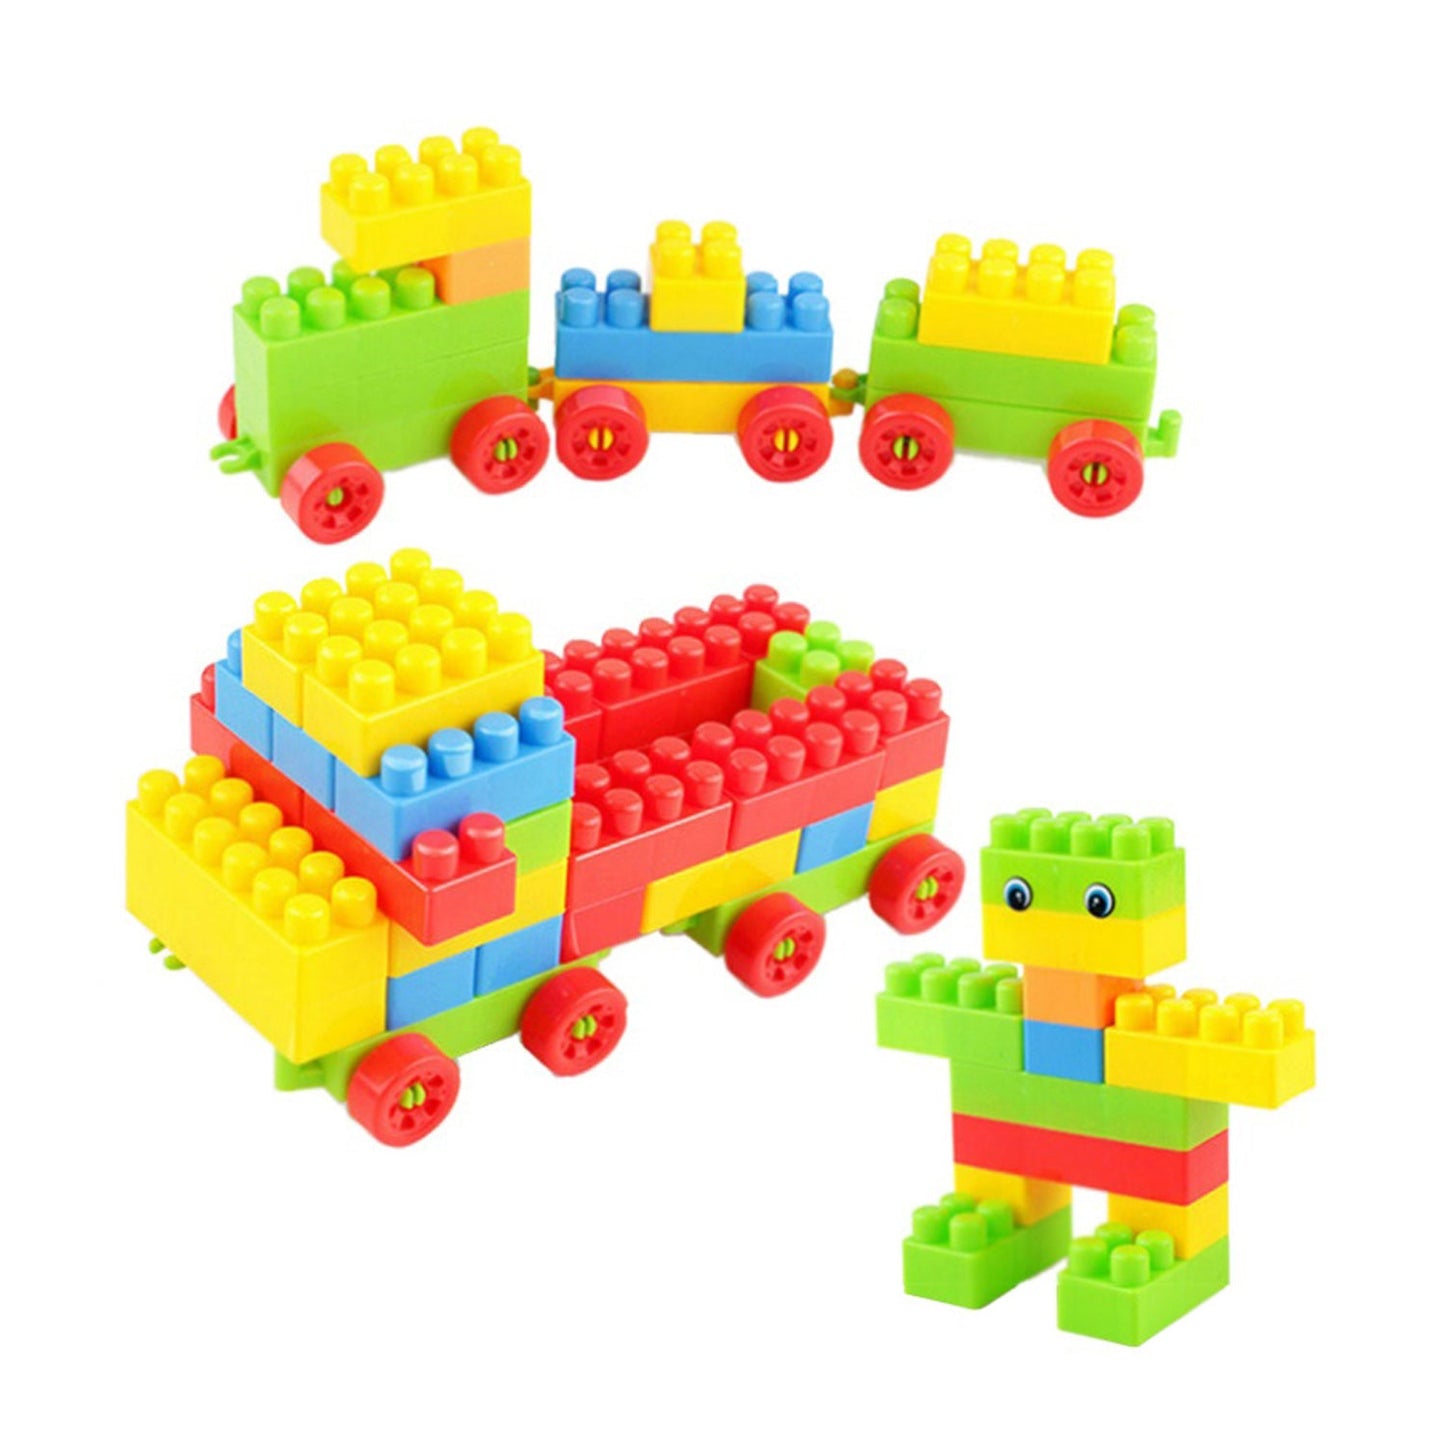 8077 60pc Building Blocks Early Learning Educational Toy for Kids - SWASTIK CREATIONS The Trend Point SWASTIK CREATIONS The Trend Point